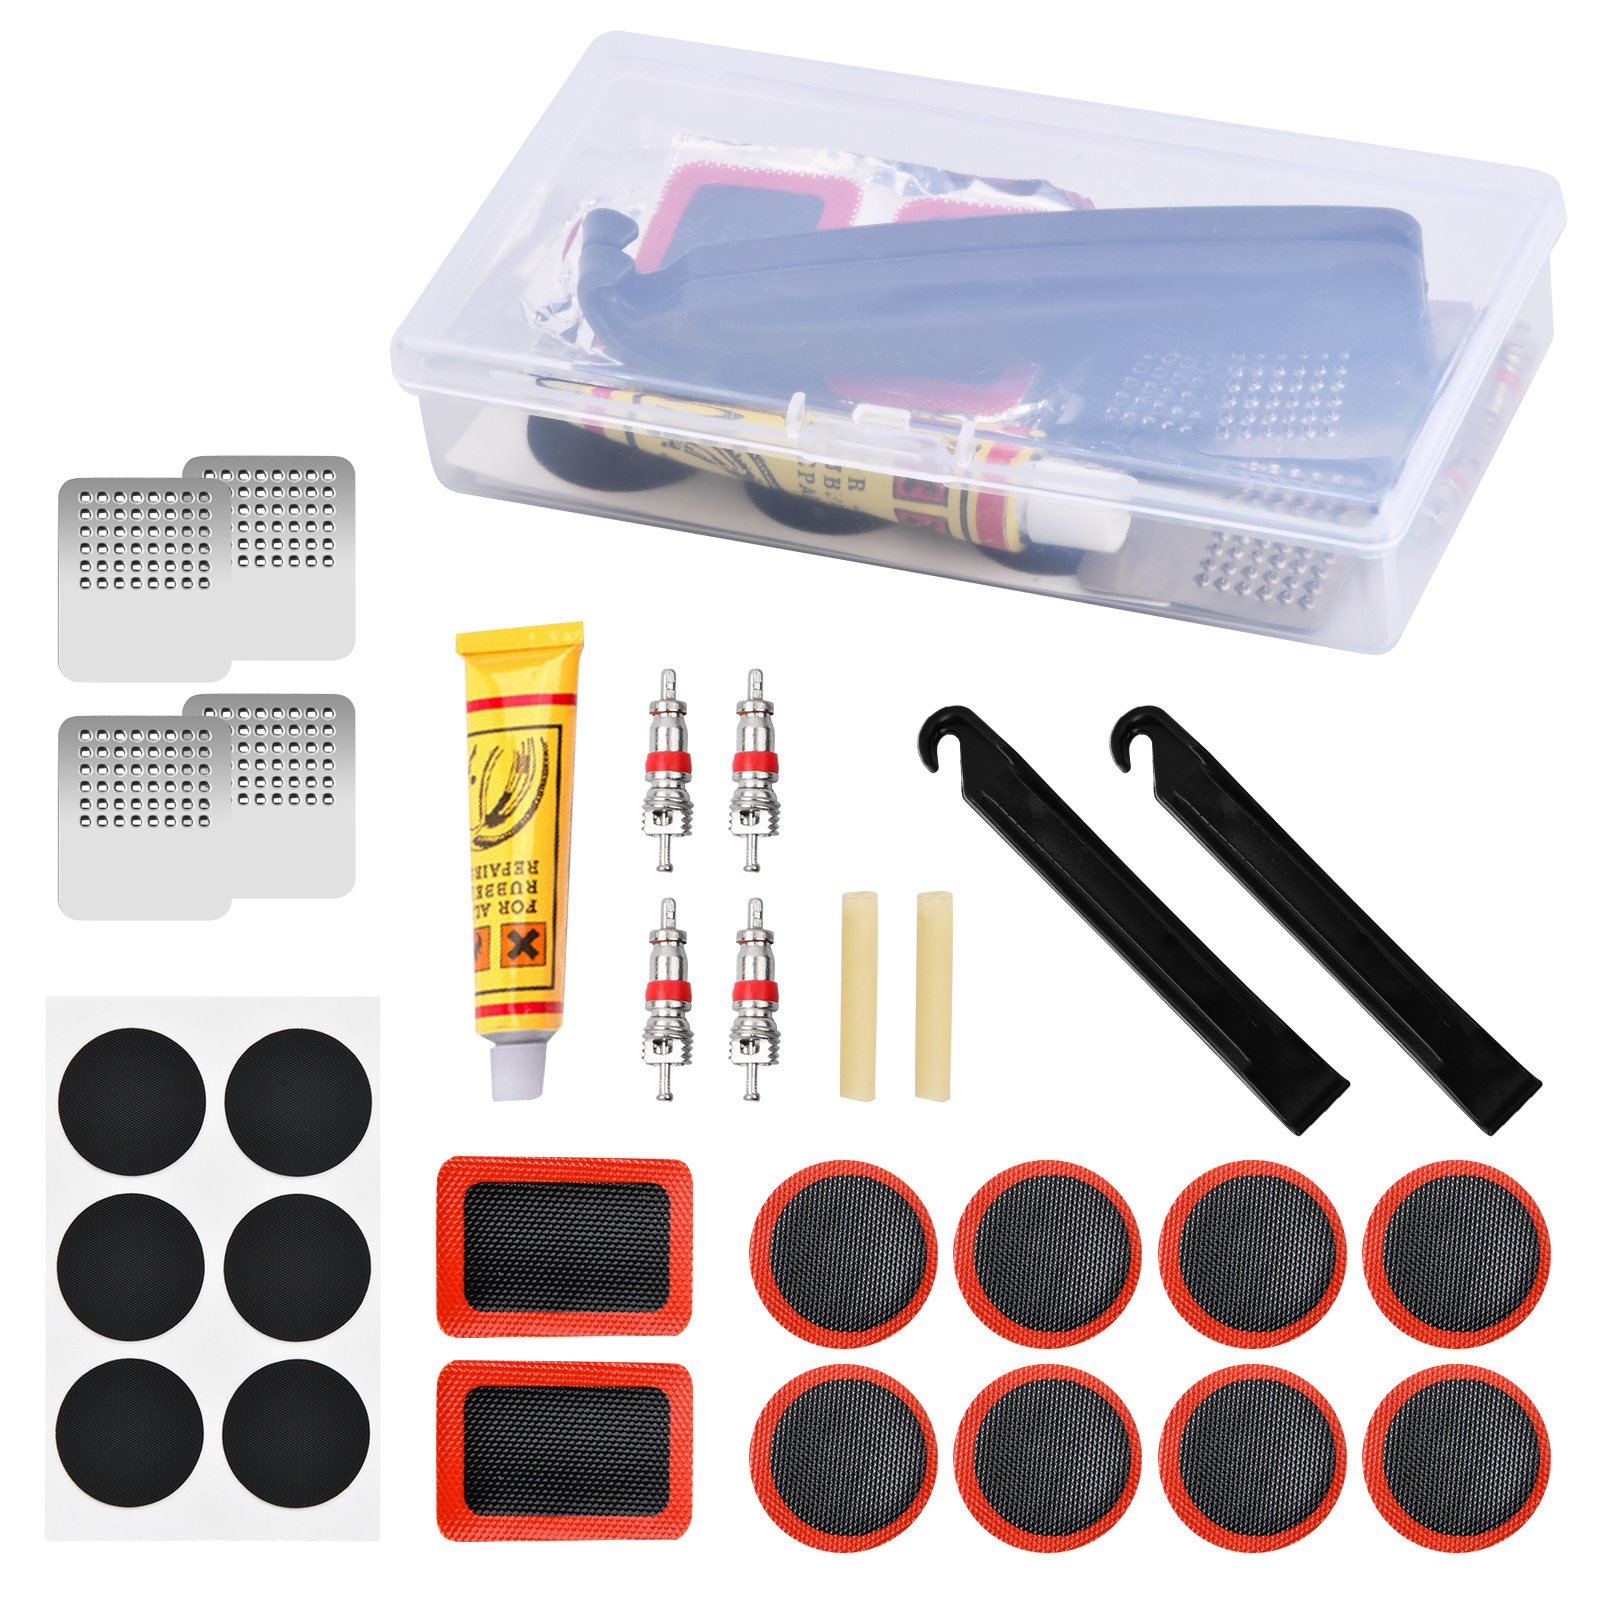 KIT REPARATION CHAMBRE A AIR VELO, RUSTINES - 7 PIECES